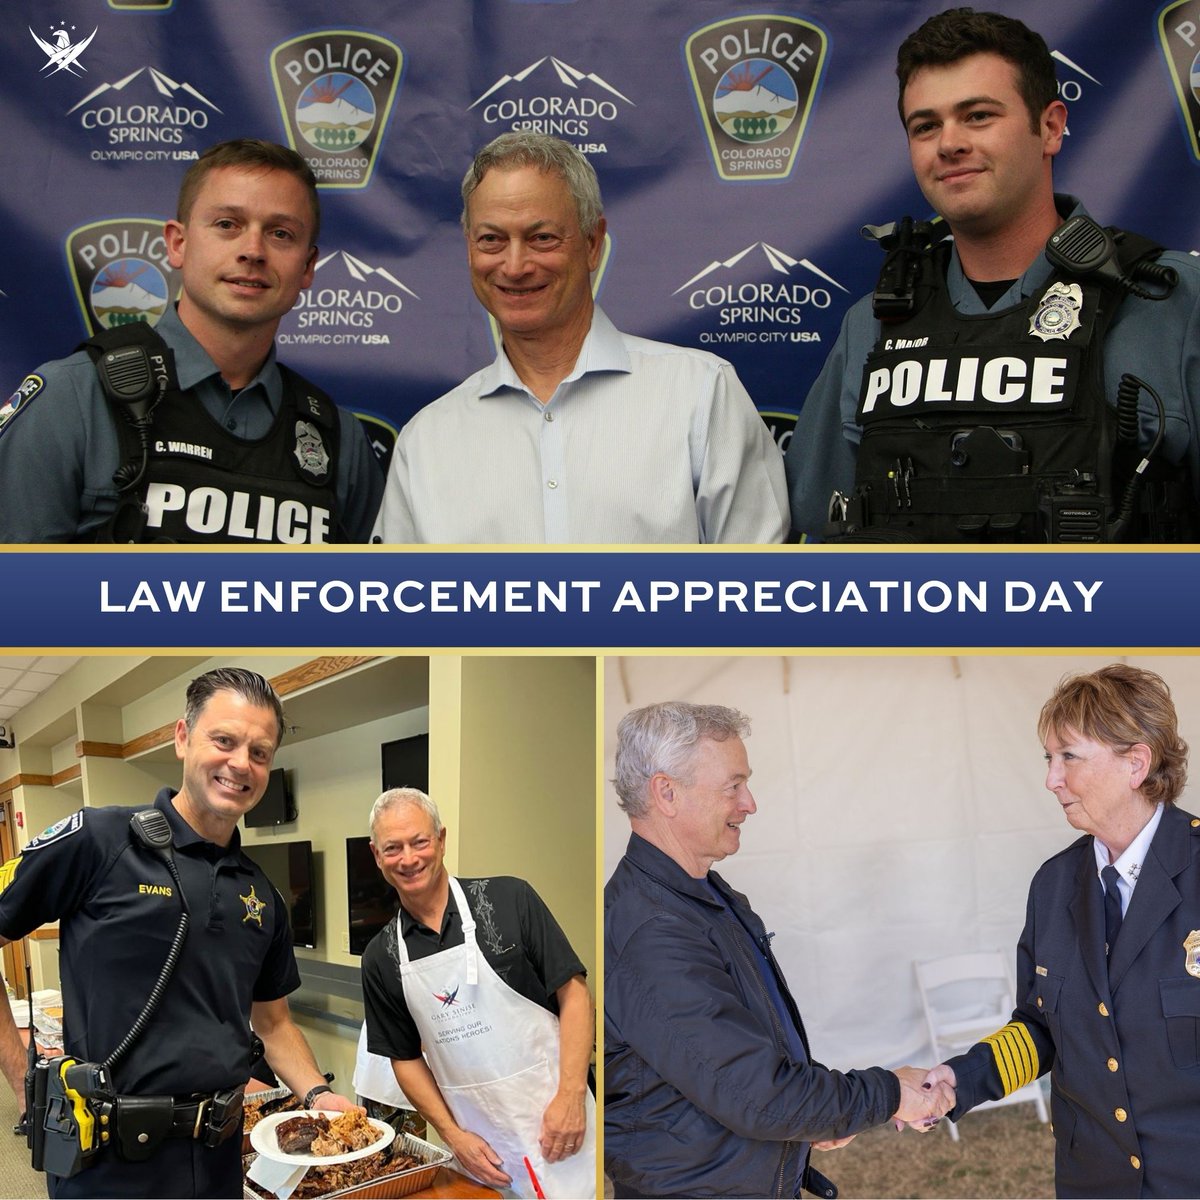 Join us today in observing National Law Enforcement Appreciation Day as we salute the First Responders across the country who keep our families and our communities safe. We are proud to show our gratitude to these heroes and their families today and every day.